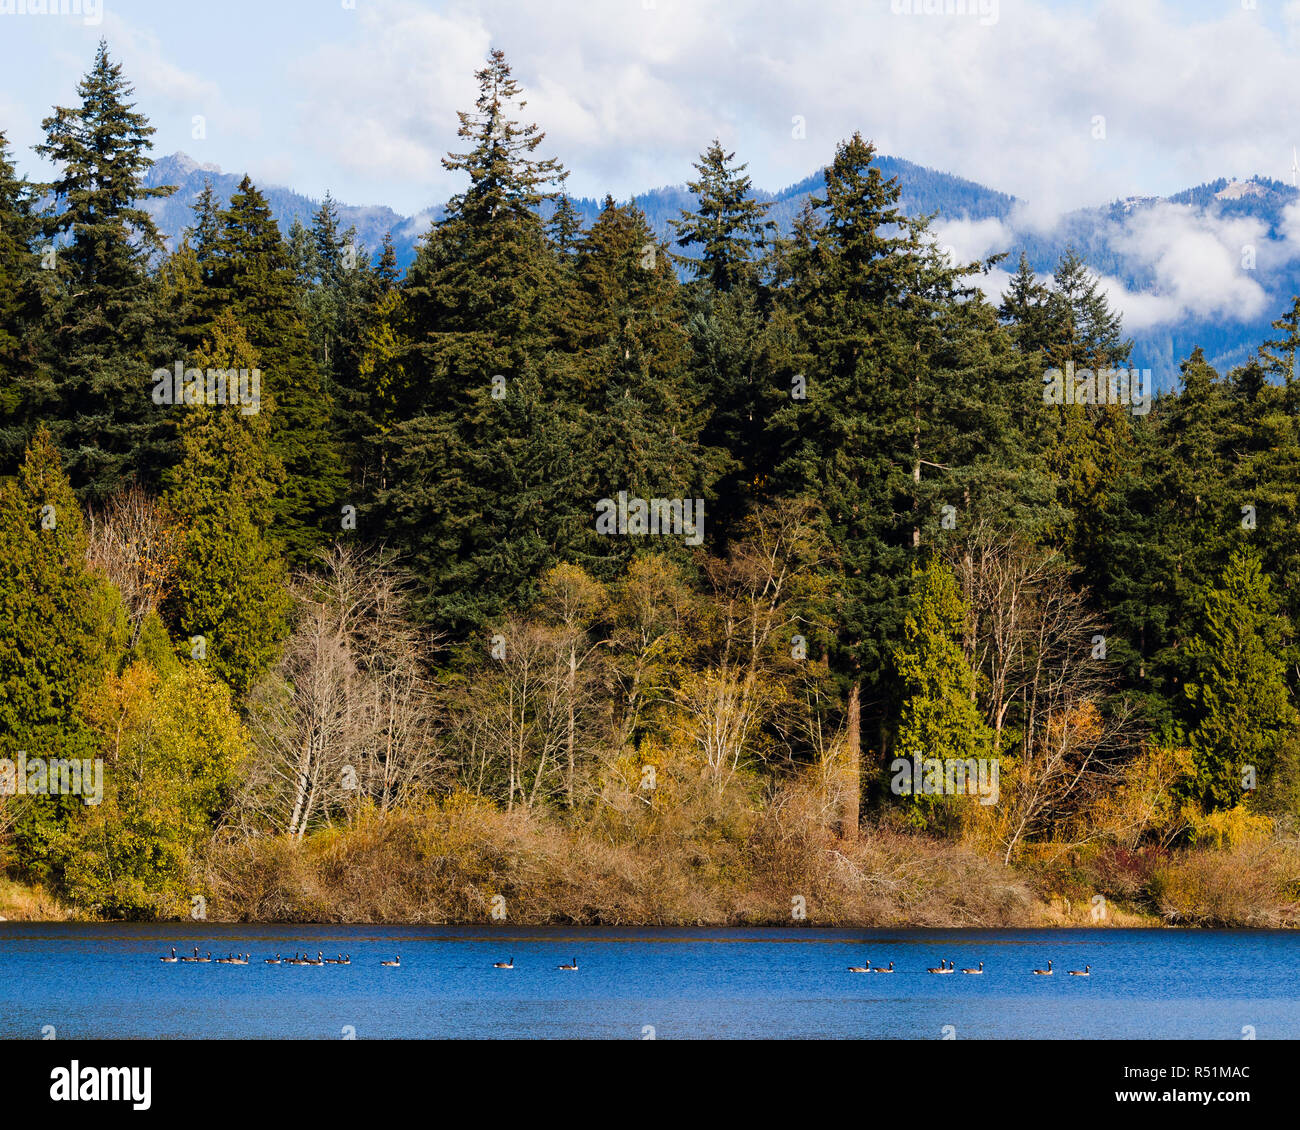 A group of Canada geese floating on Lost Lagoon in Vancouver, Canada with autumn trees in Stanley Park and Grouse mountain in the background. Stock Photo